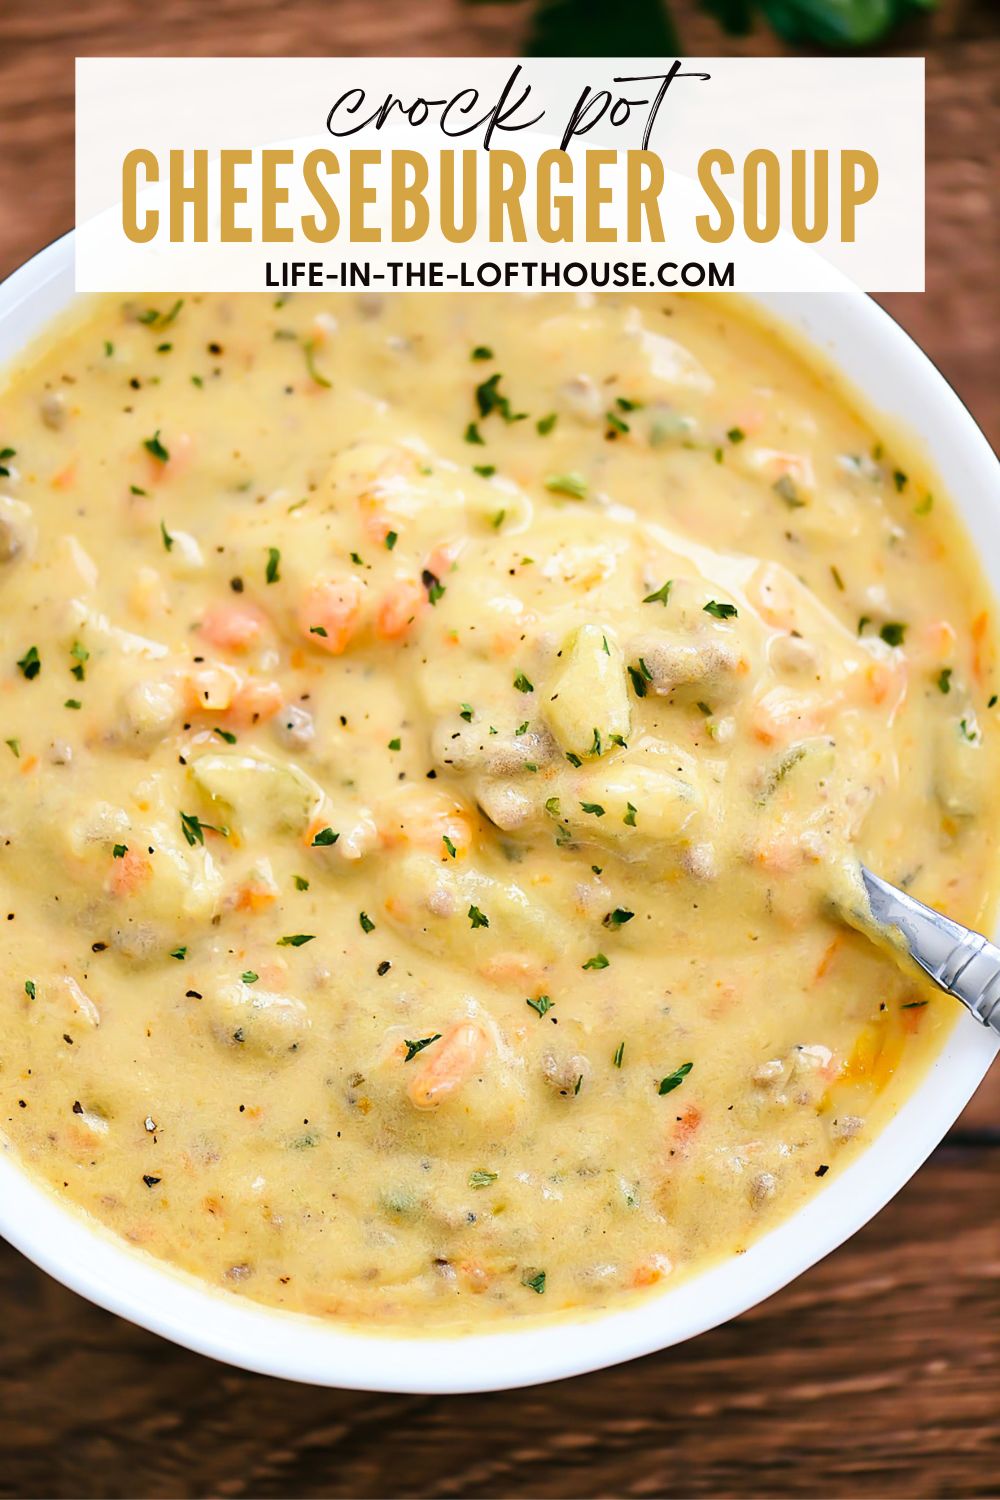 Cheeseburger Soup is a creamy and cheesy soup loaded with potatoes, ground beef, carrots and more. Life-in-the-Lofthouse.com